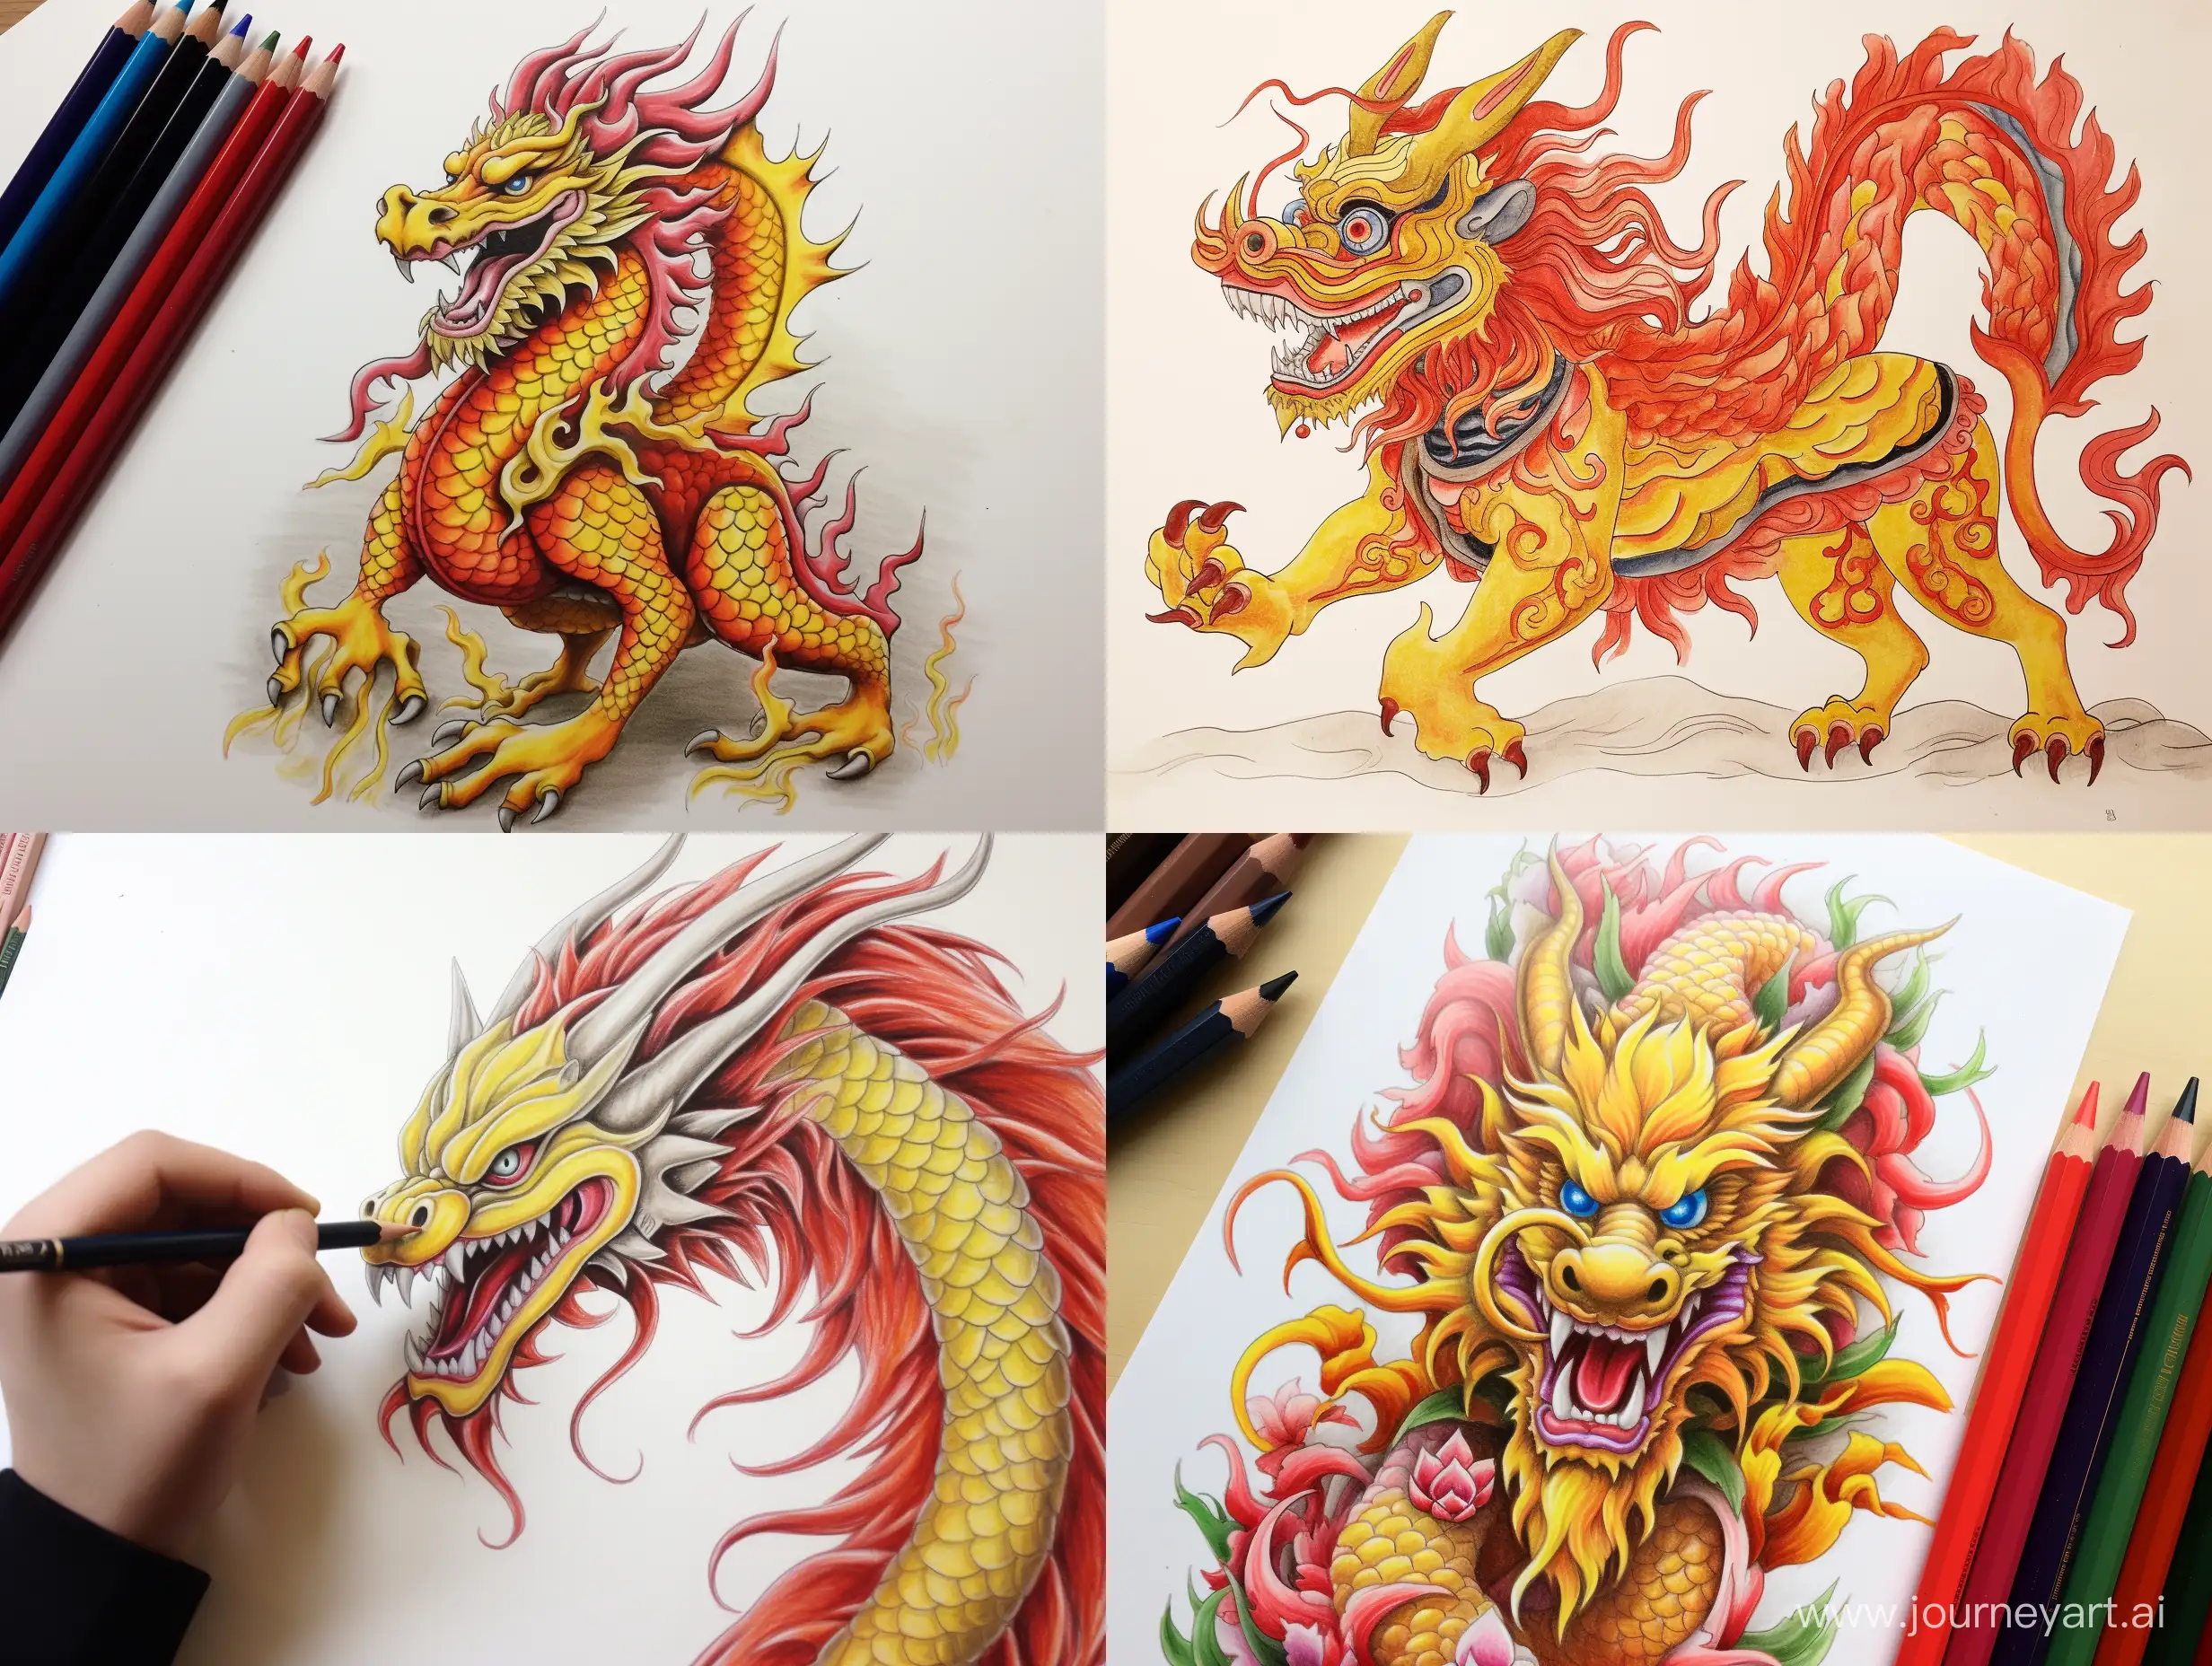 Majestic-Lunar-New-Year-Dragon-Vibrant-Red-and-Yellow-Dragon-in-Powerful-Stance